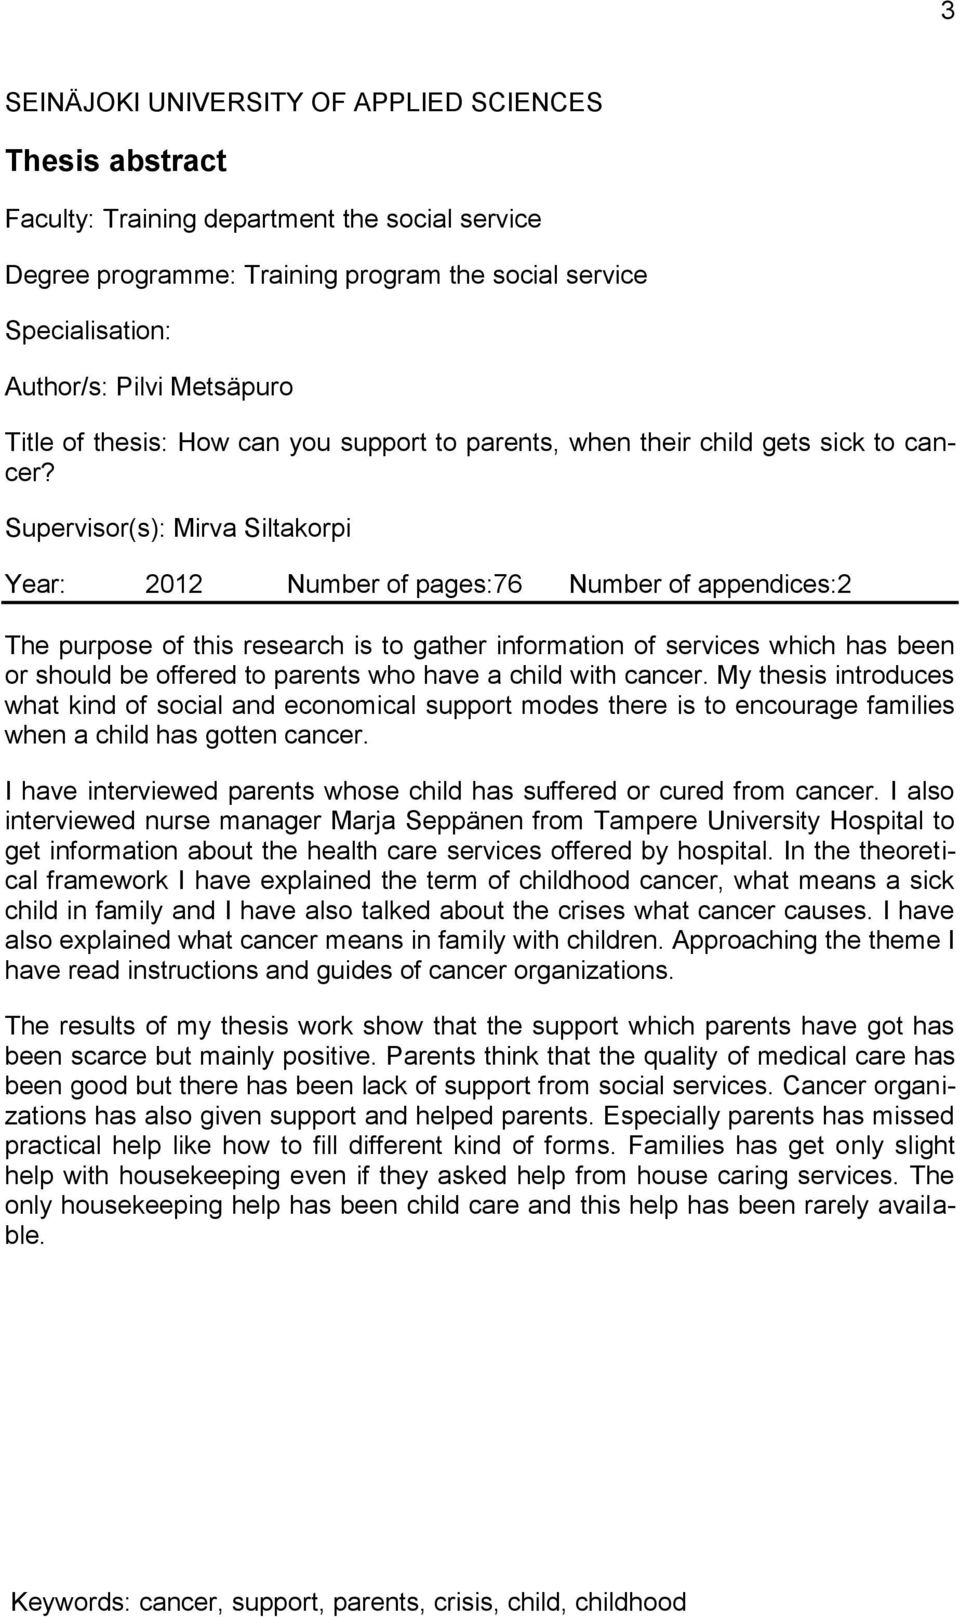 Supervisor(s): Mirva Siltakorpi Year: 2012 Number of pages:76 Number of appendices:2 The purpose of this research is to gather information of services which has been or should be offered to parents